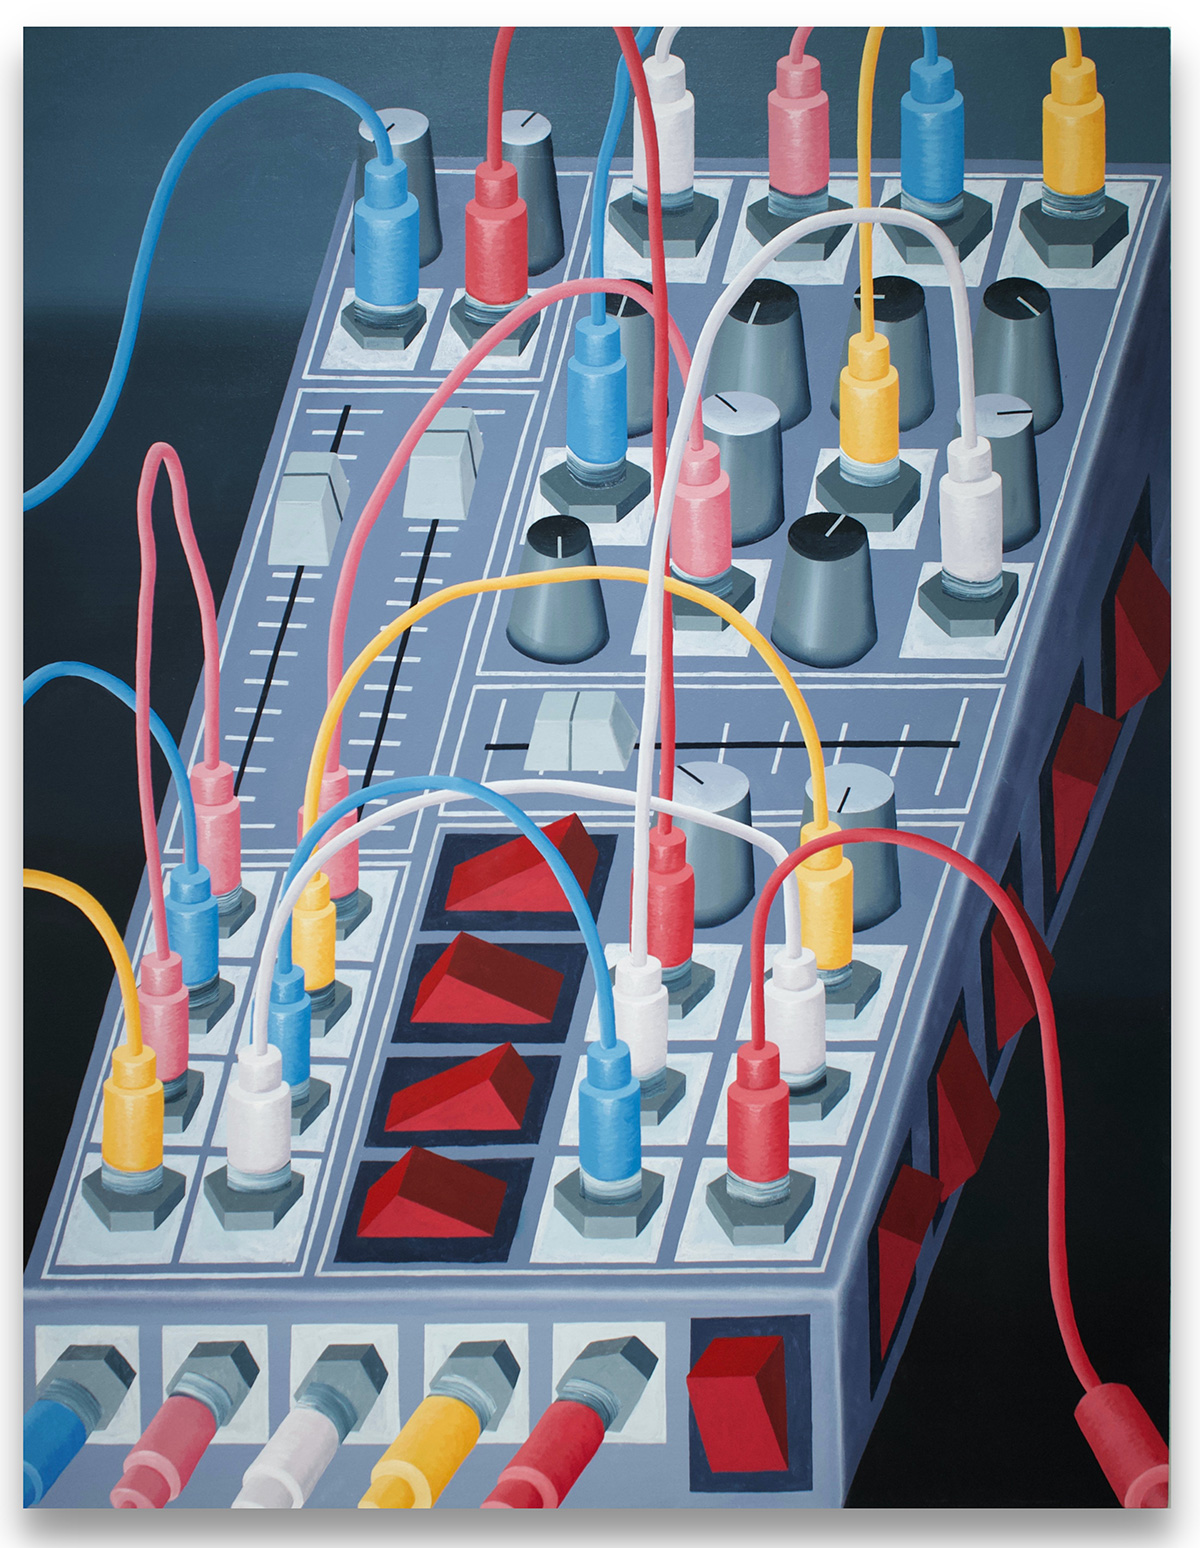 A photo of the Jack Kenna painting "Pretty Machine", showing an old synthesizer with colored red, yellow, white and blue cables connecting different jacks on the surface of the synth